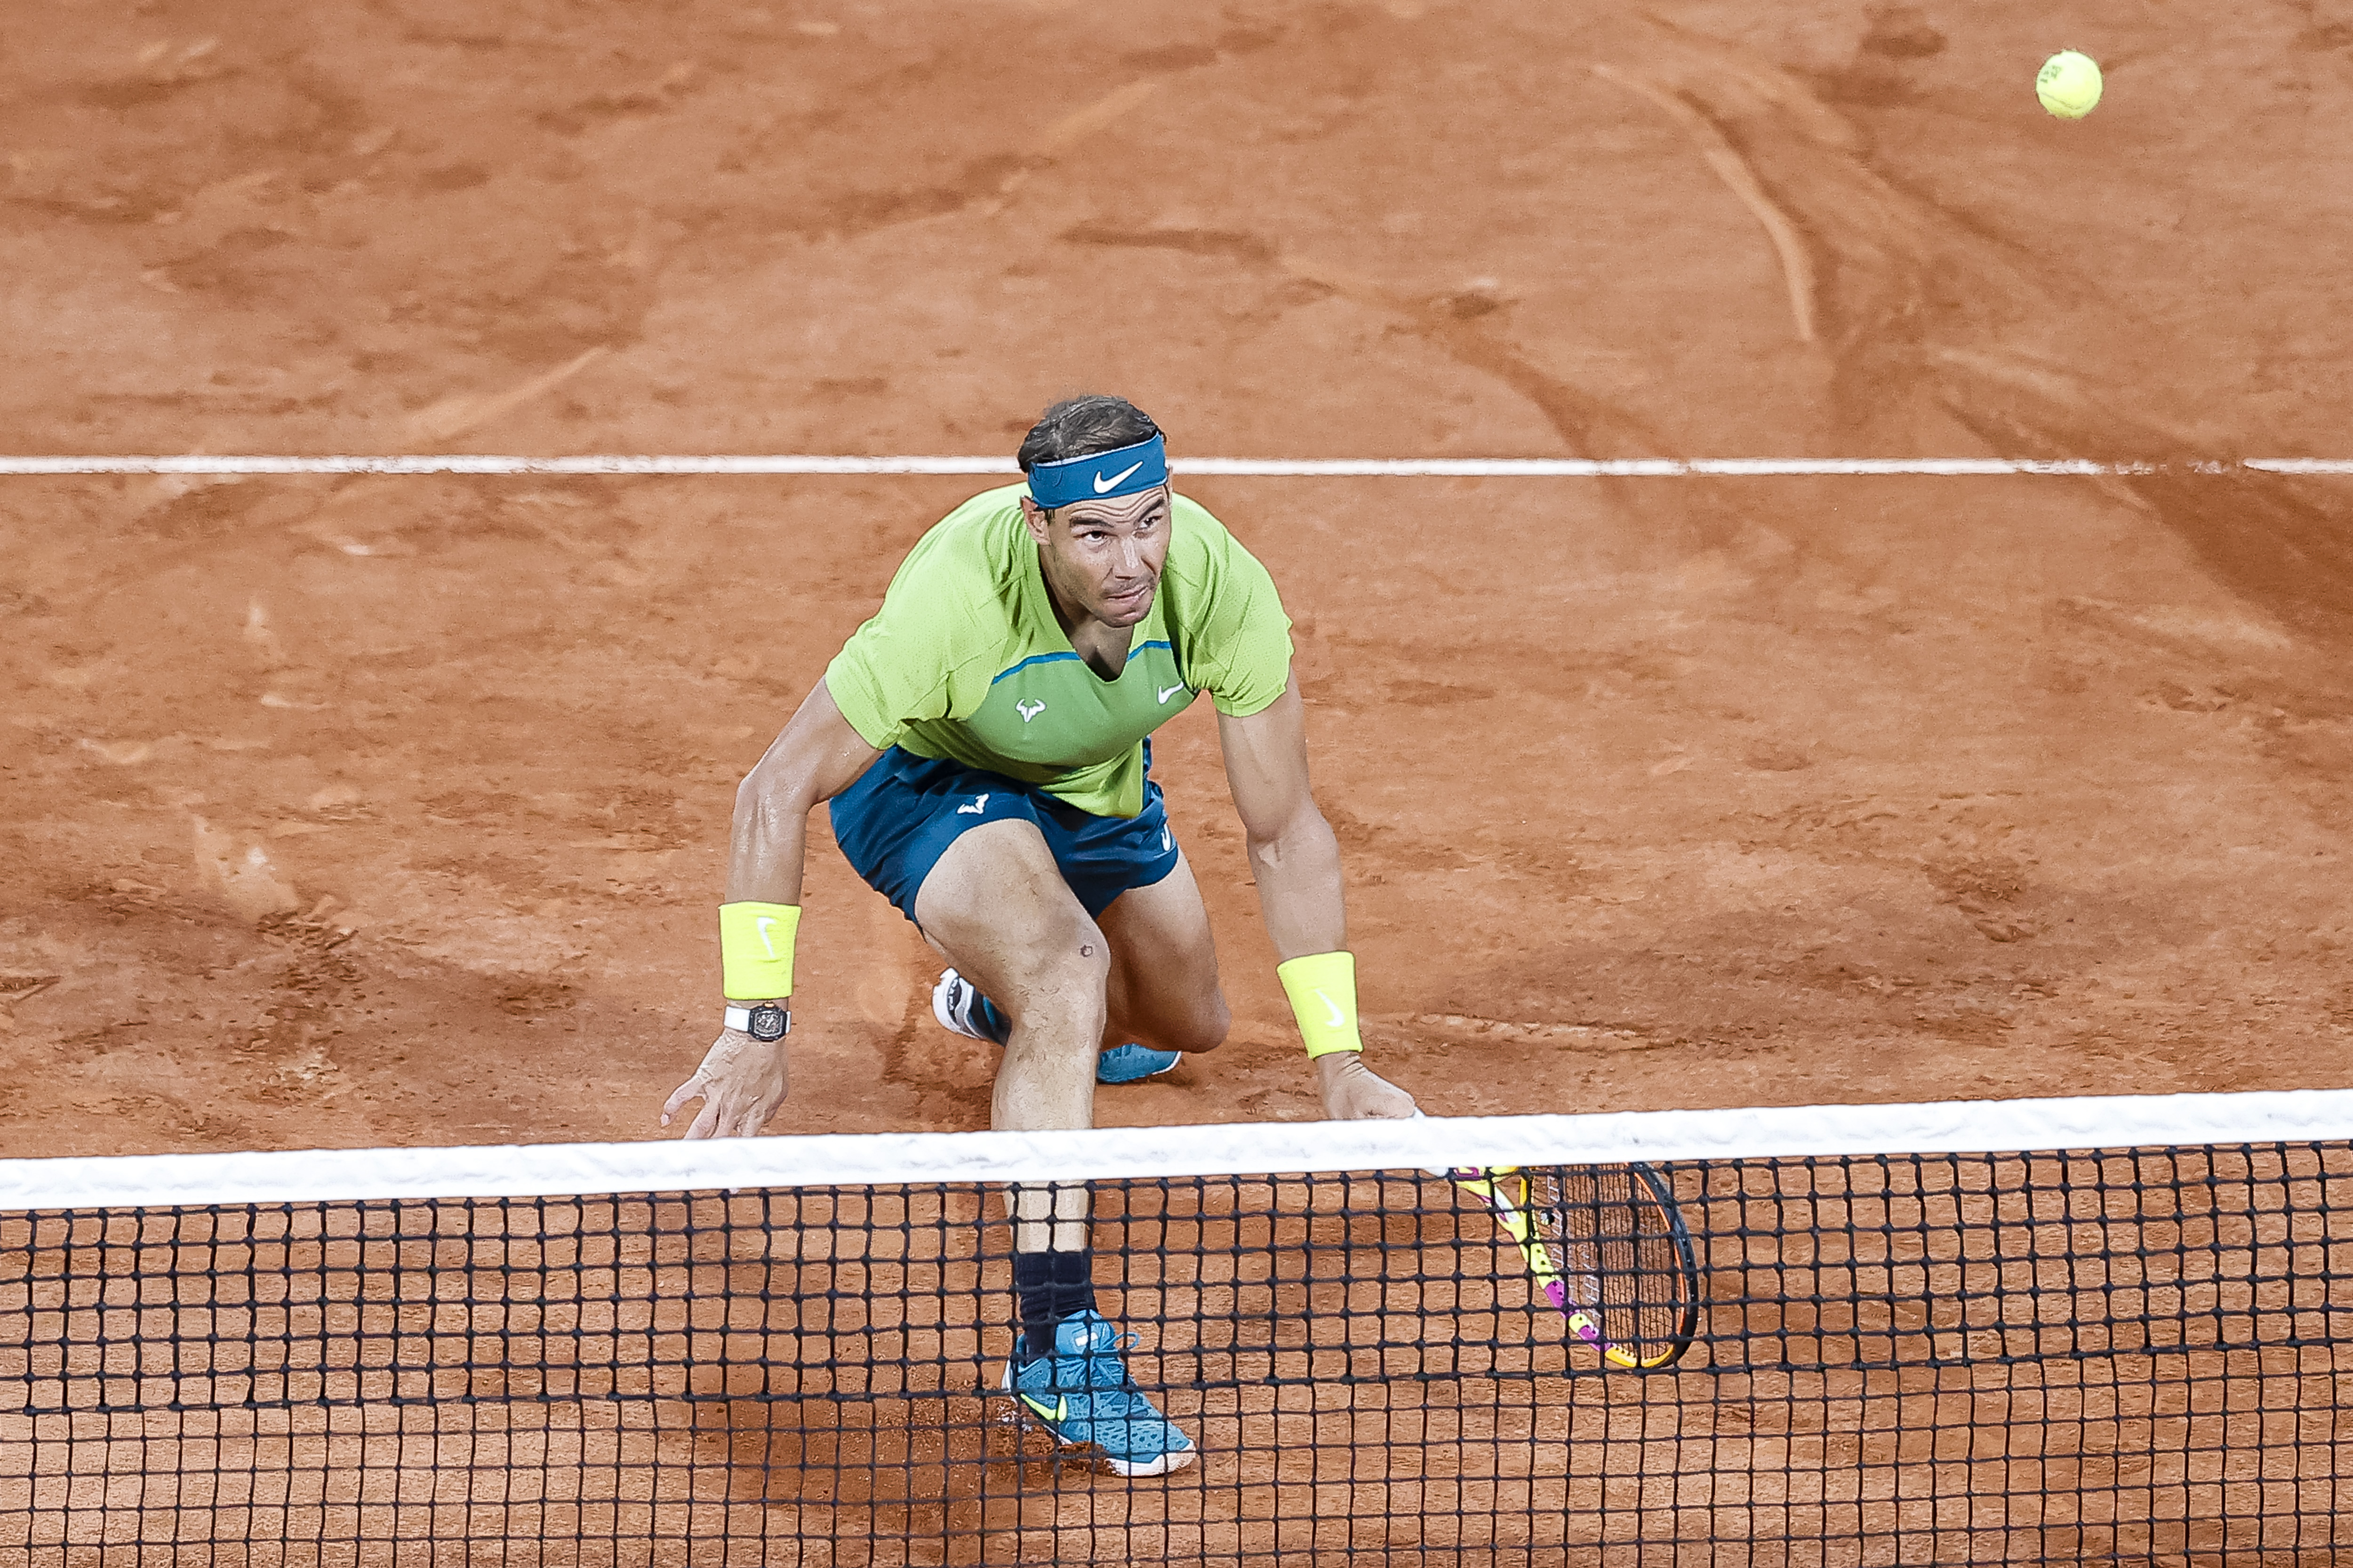 Rafa Nadal of Spain Alexander plays against Zverev of Germany during the Men’s Singles Semi Finals match on Day 12 of The 2022 French Open at Roland Garros on June 3, 2022 in Paris, France.